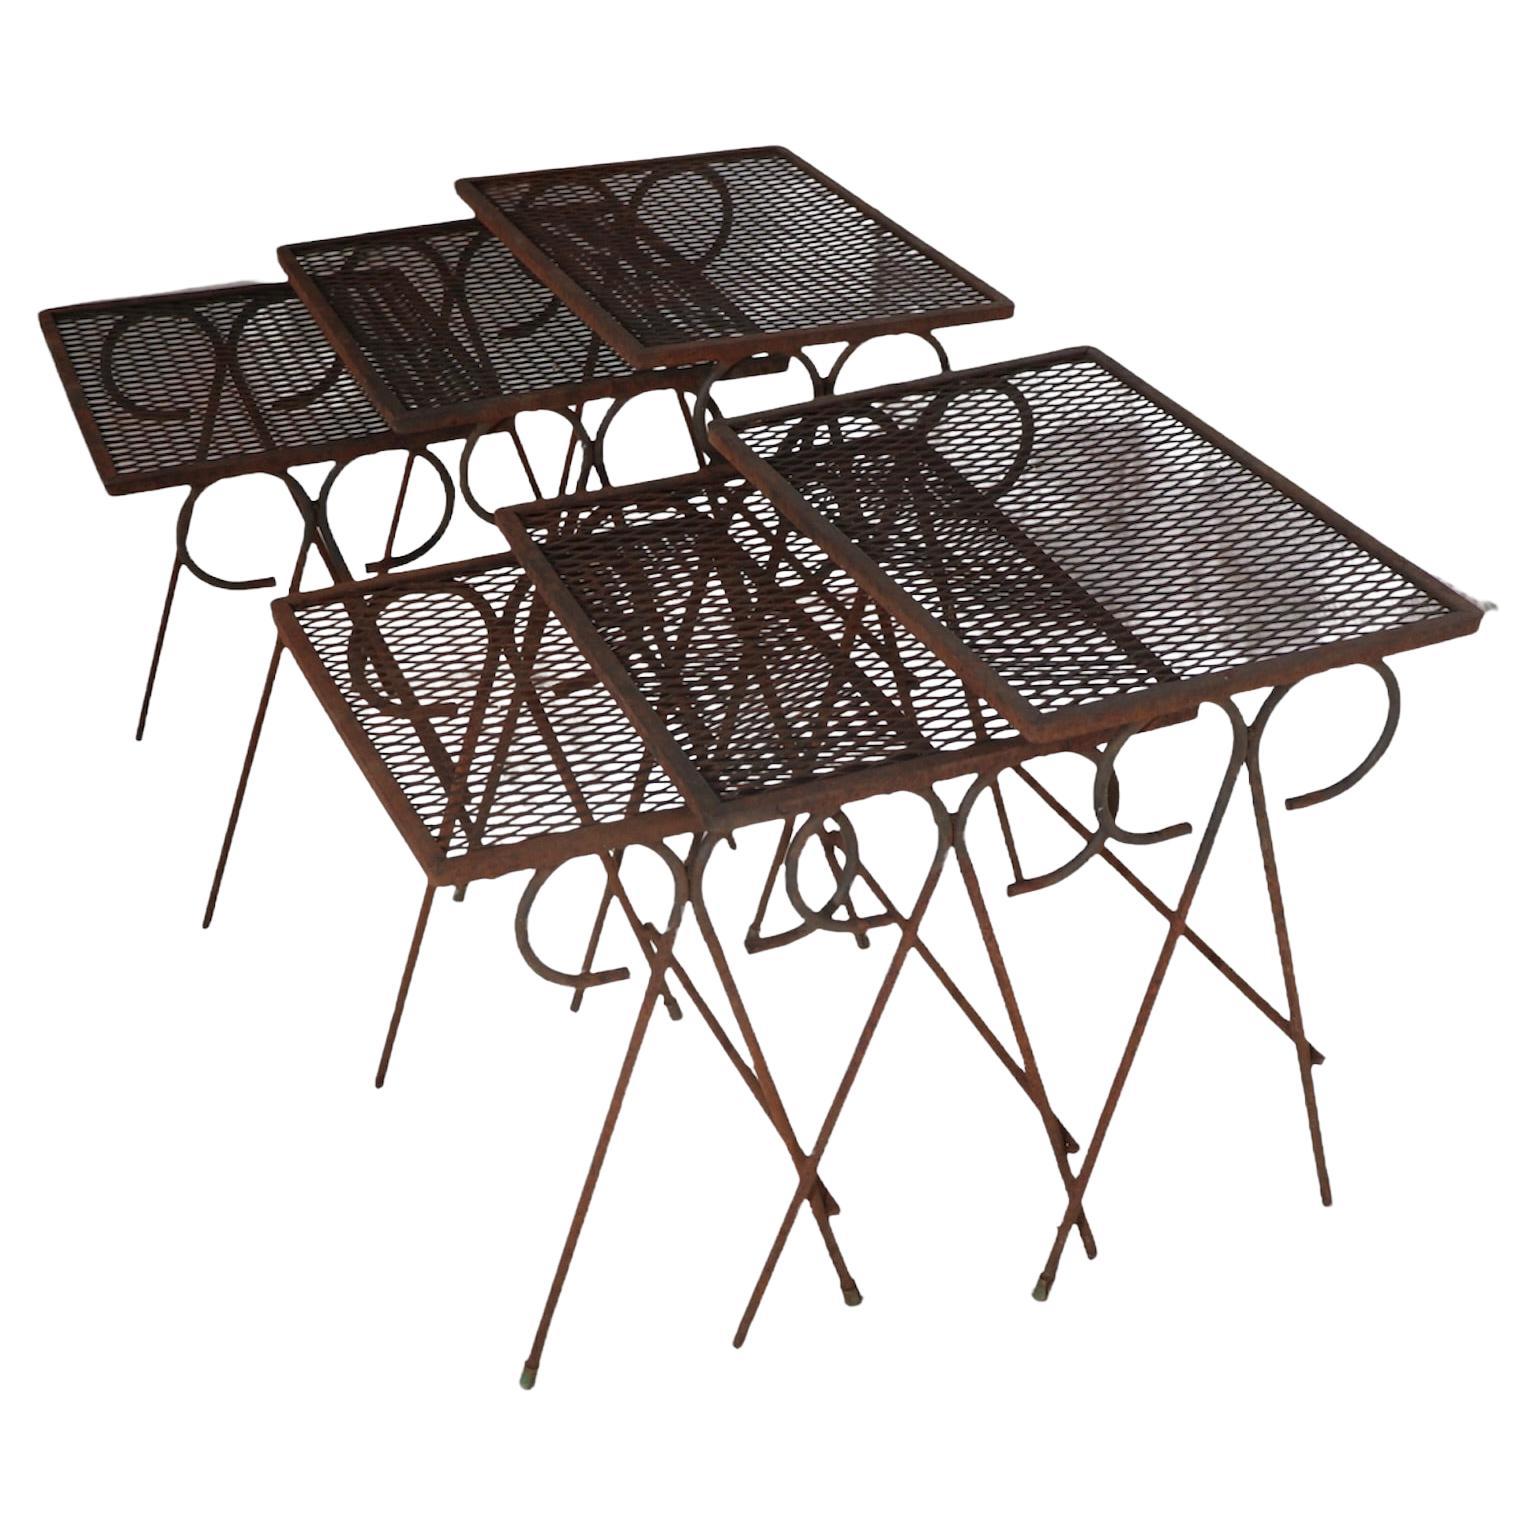 2 Sets of Three Wrought Iron Nesting Tables by Tempestini for Salterini